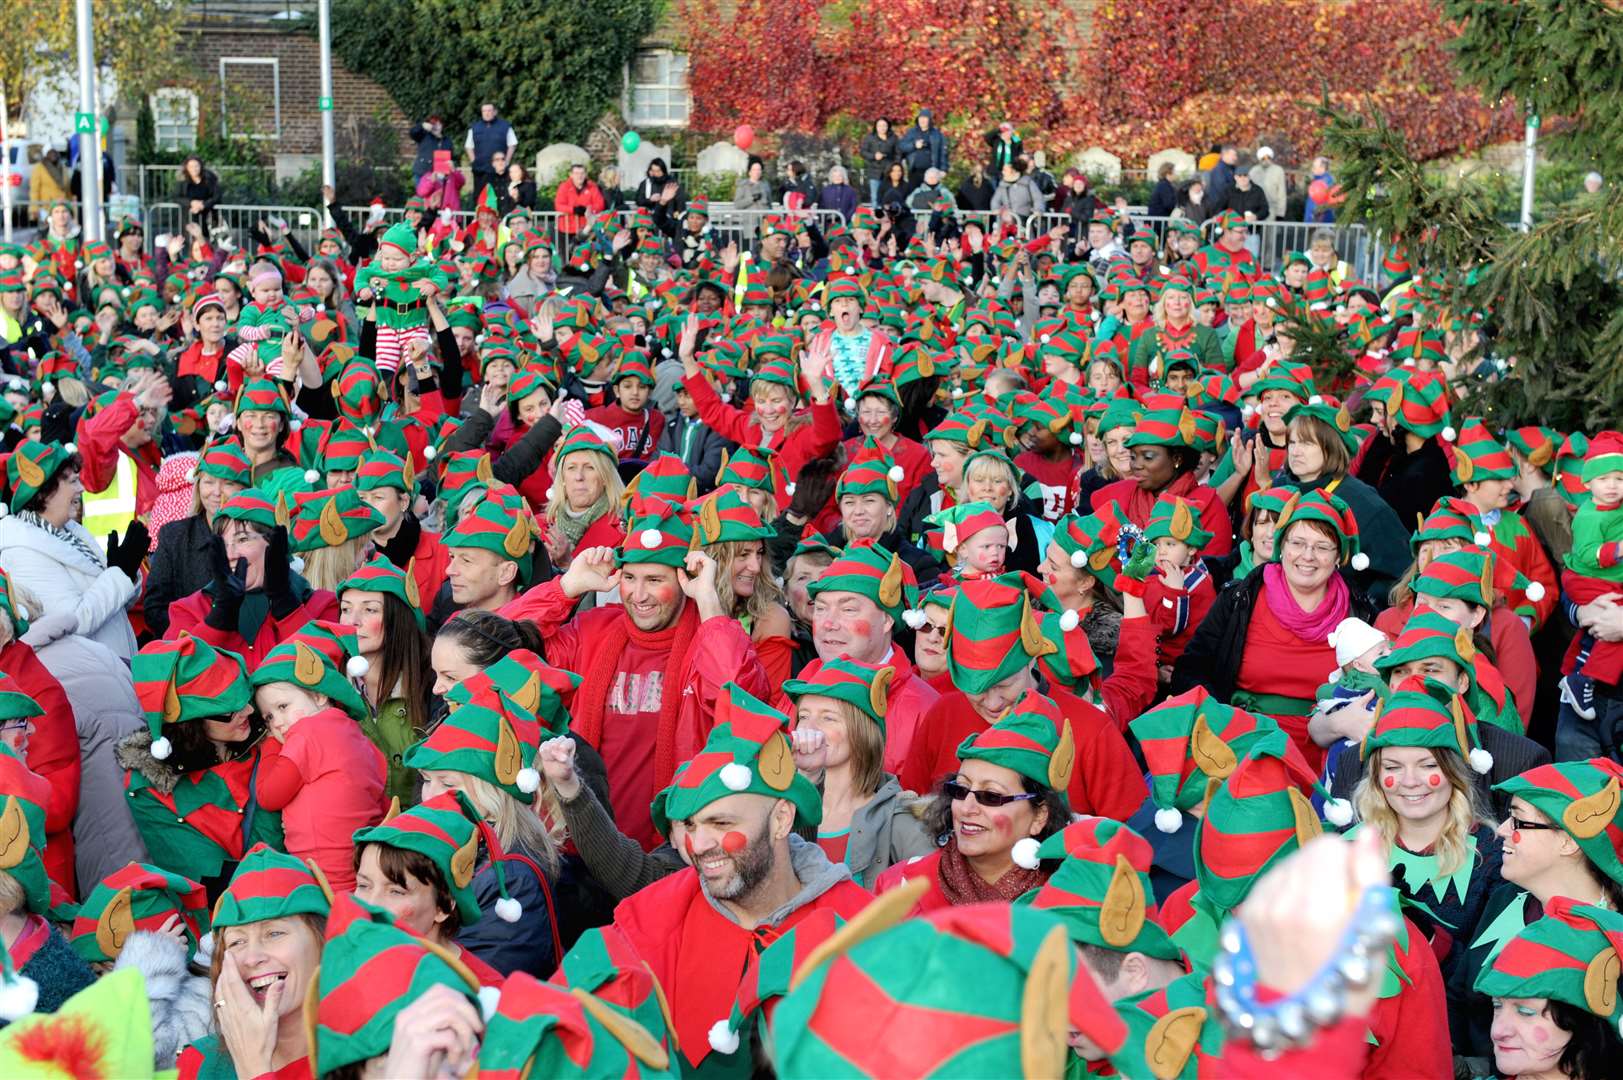 2014's world record attempt for the largest congregation of elves.